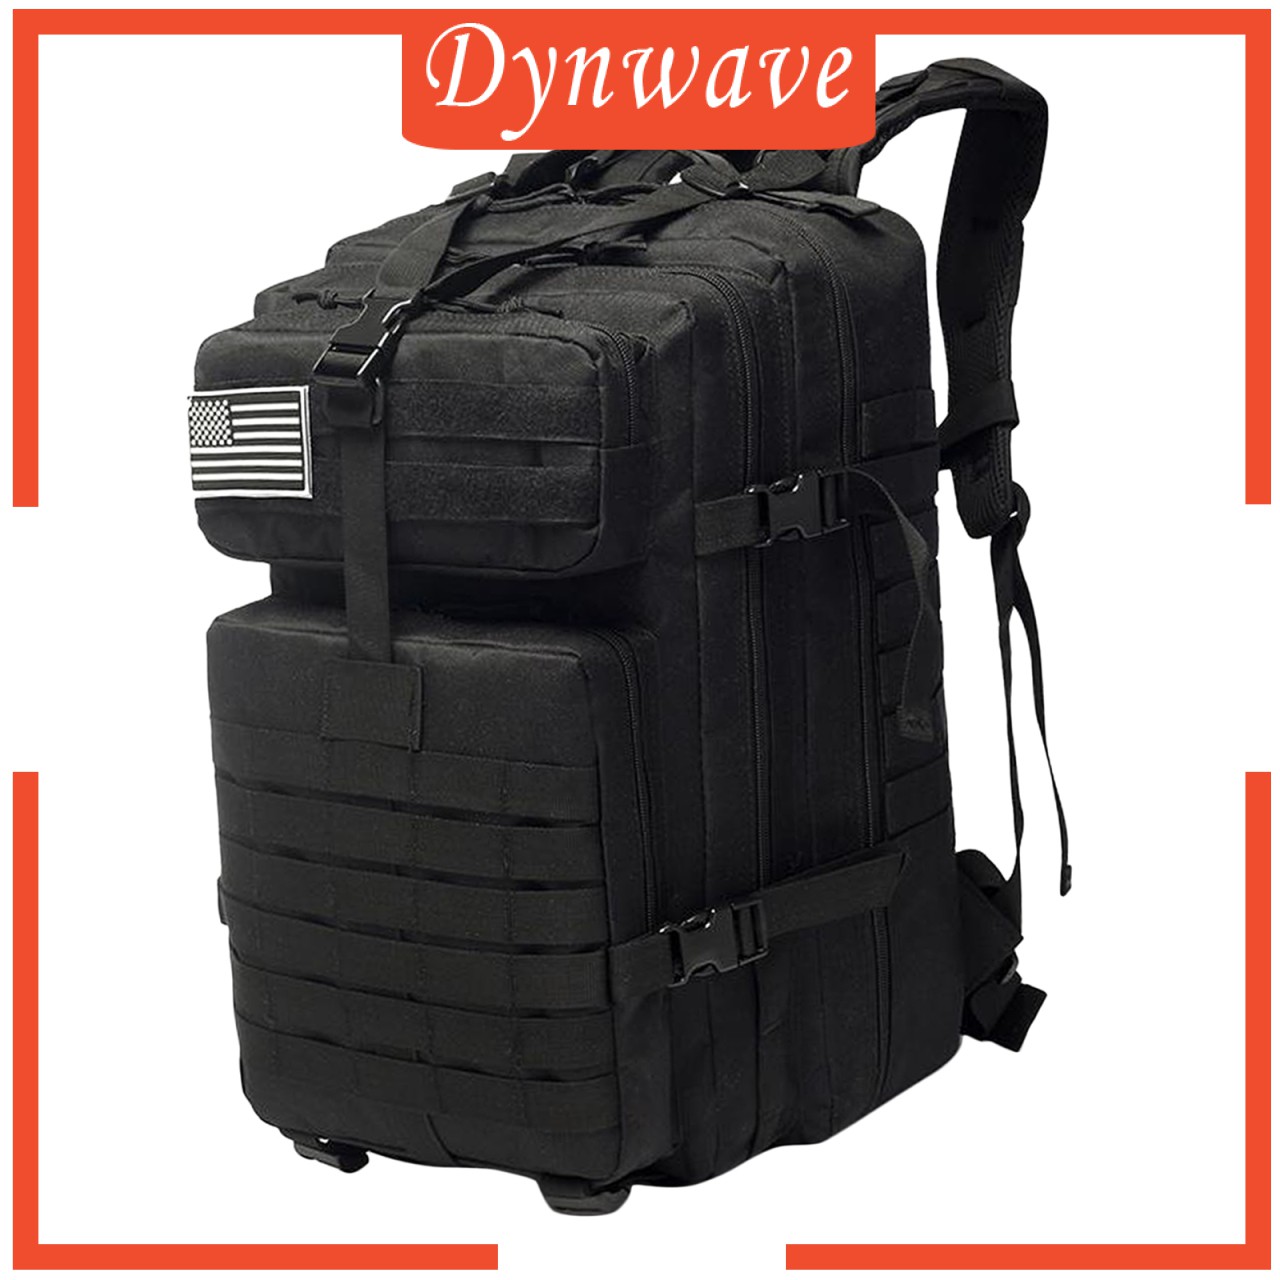 [DYNWAVE] 50L Military Tactical Backpack Army Assault Pack Waterproof Rucksack Hiking Bag